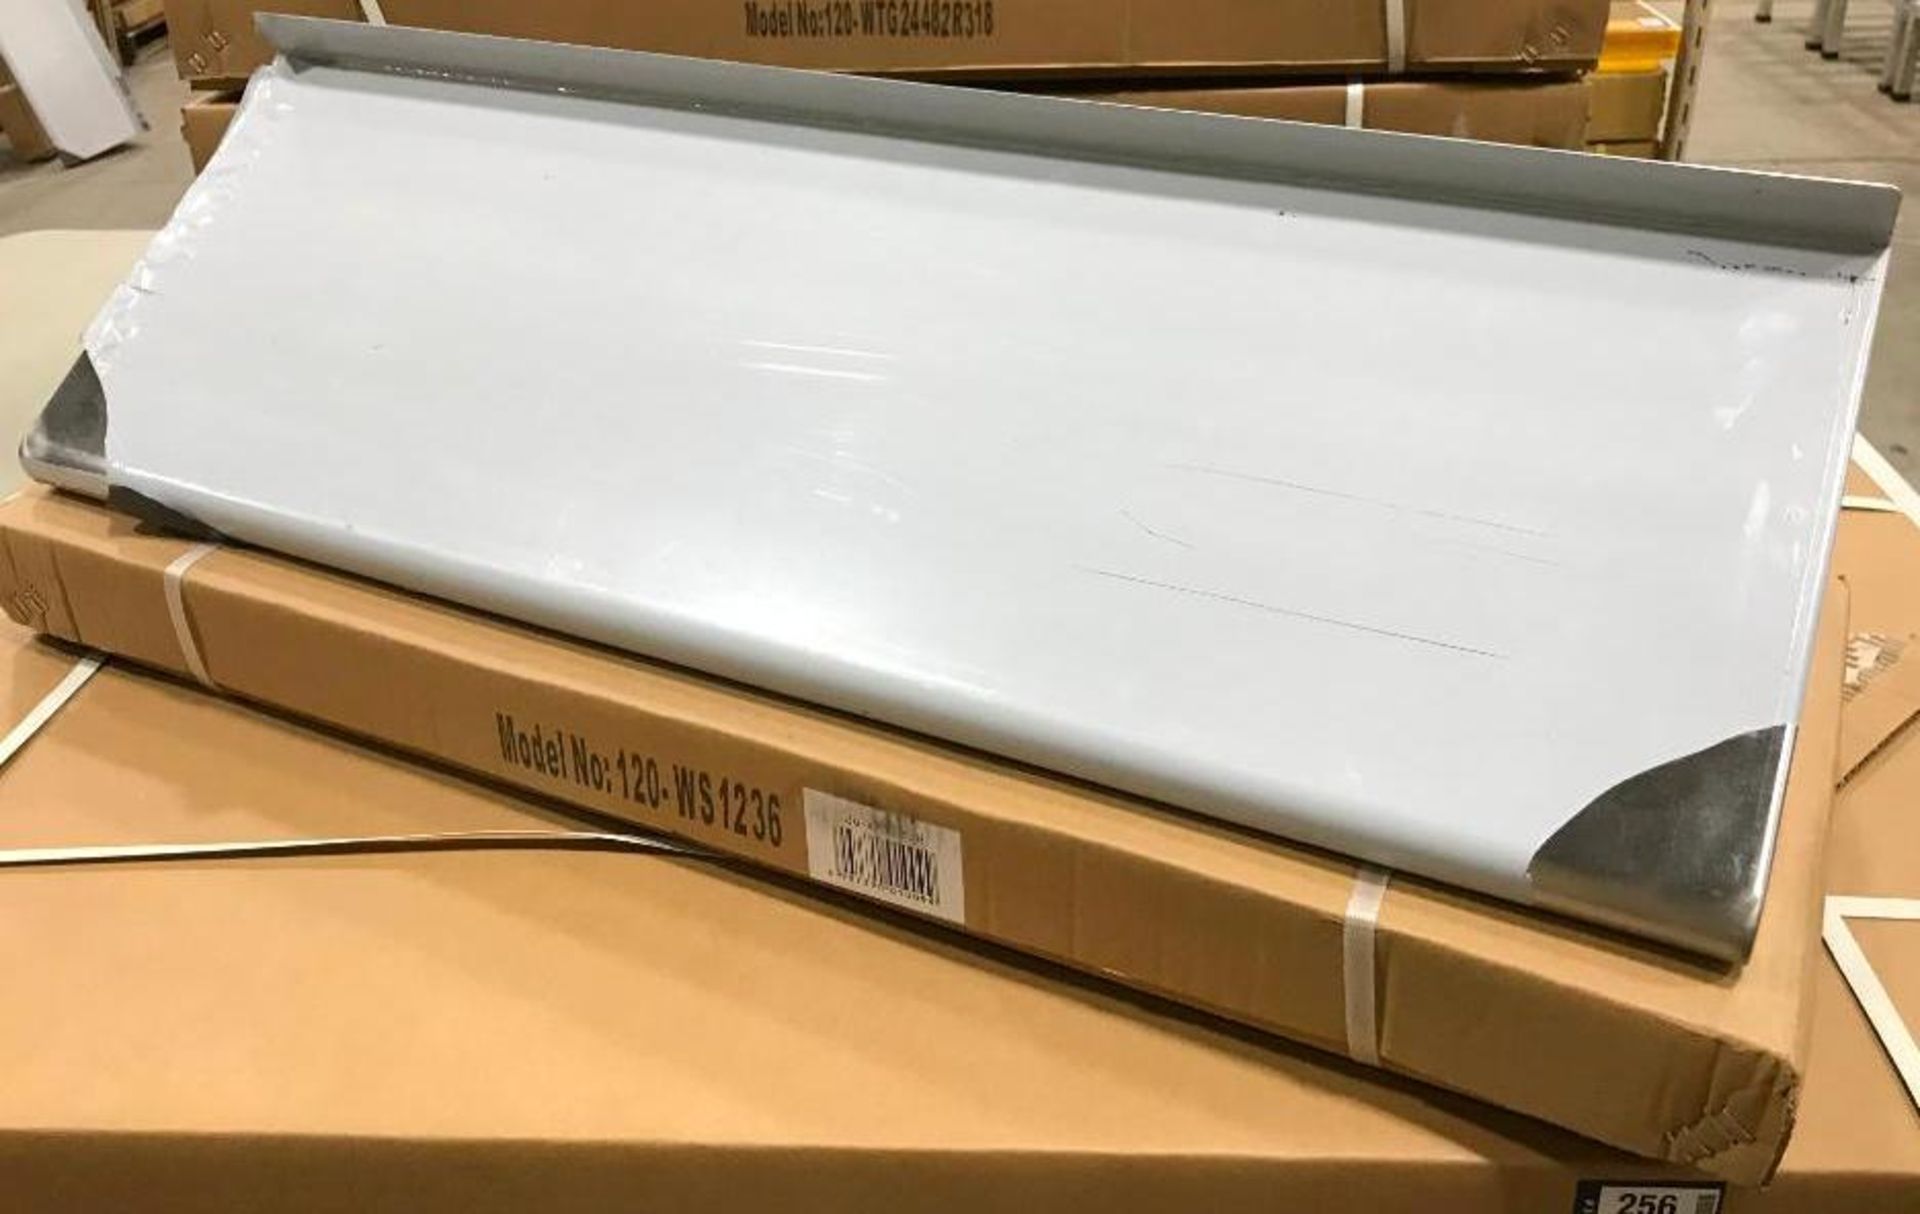 WALL MOUNT S/S SHELF 12"X36", 120 -WS1236 - NEW IN BOX - Image 2 of 3